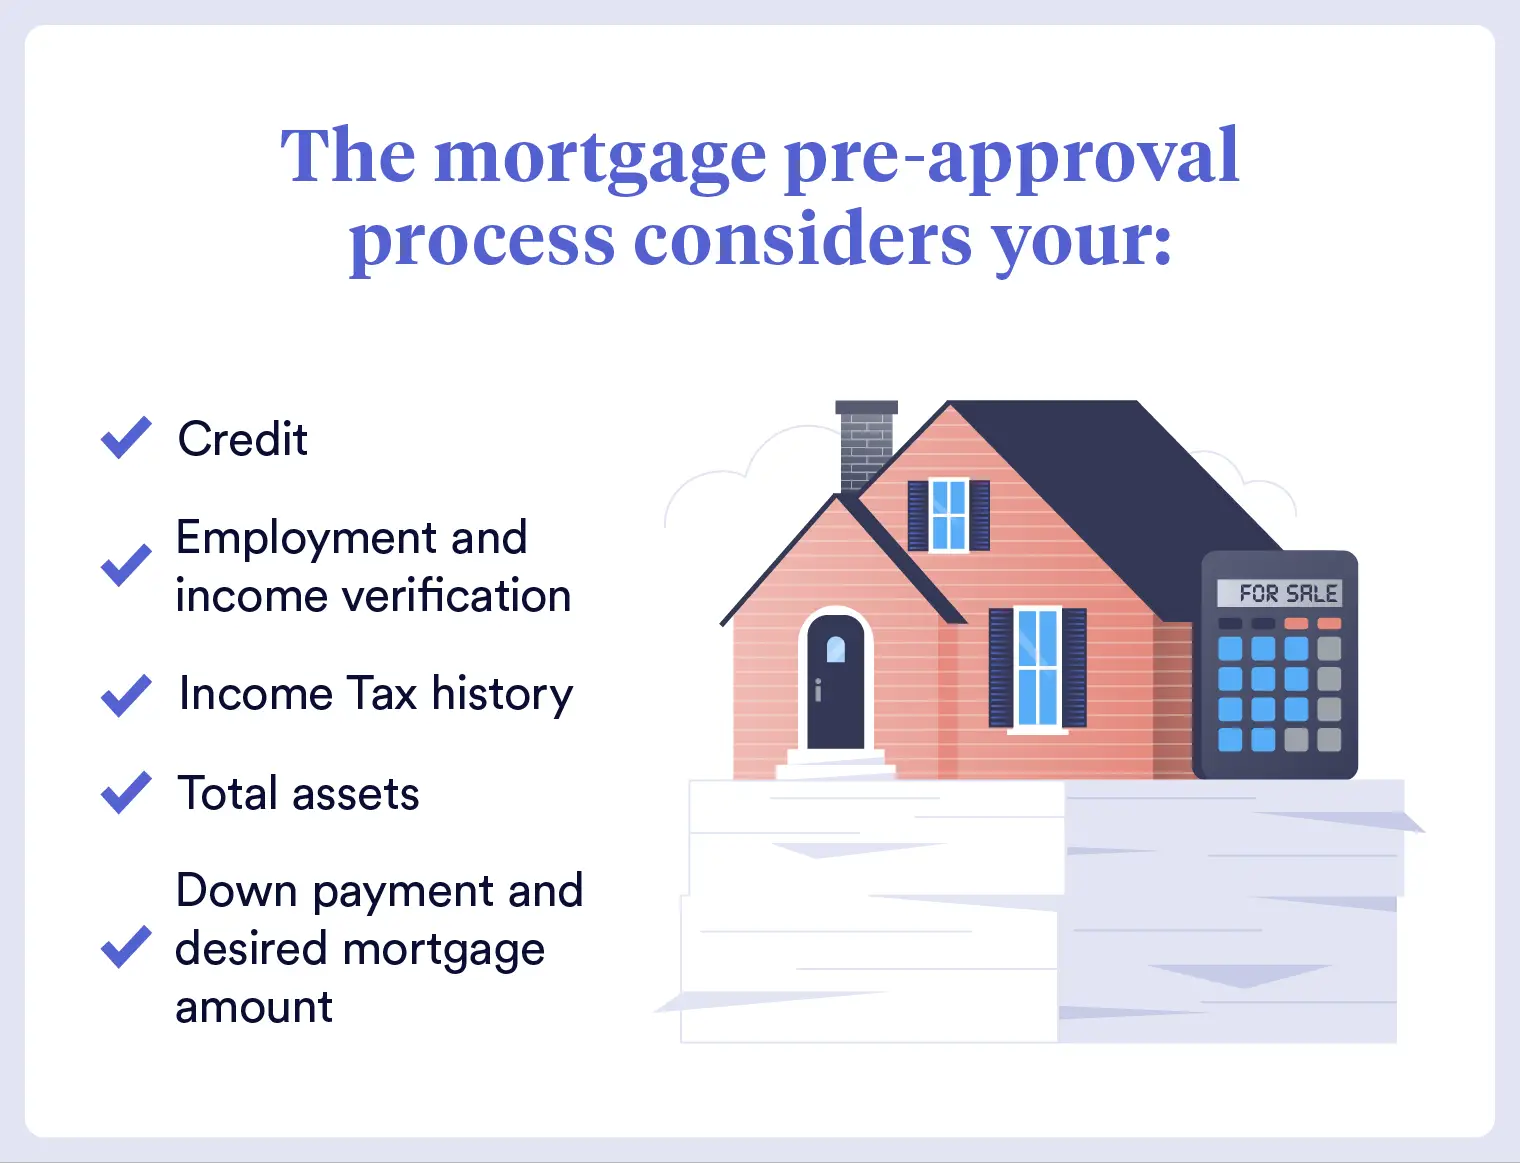 How Long is a Mortgage Pre